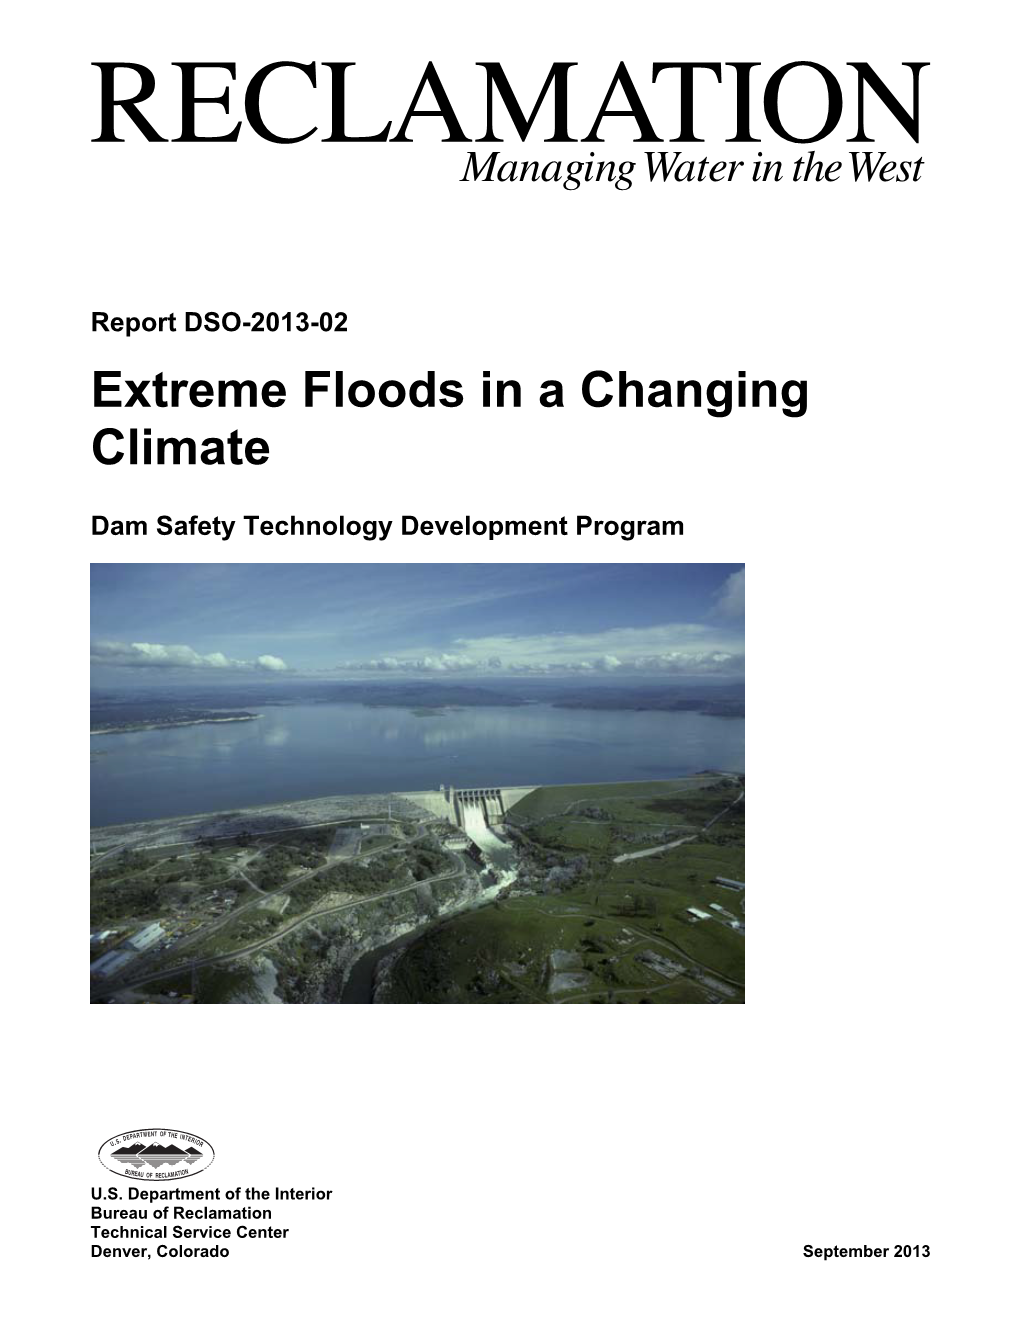 Extreme Floods in a Changing Climate